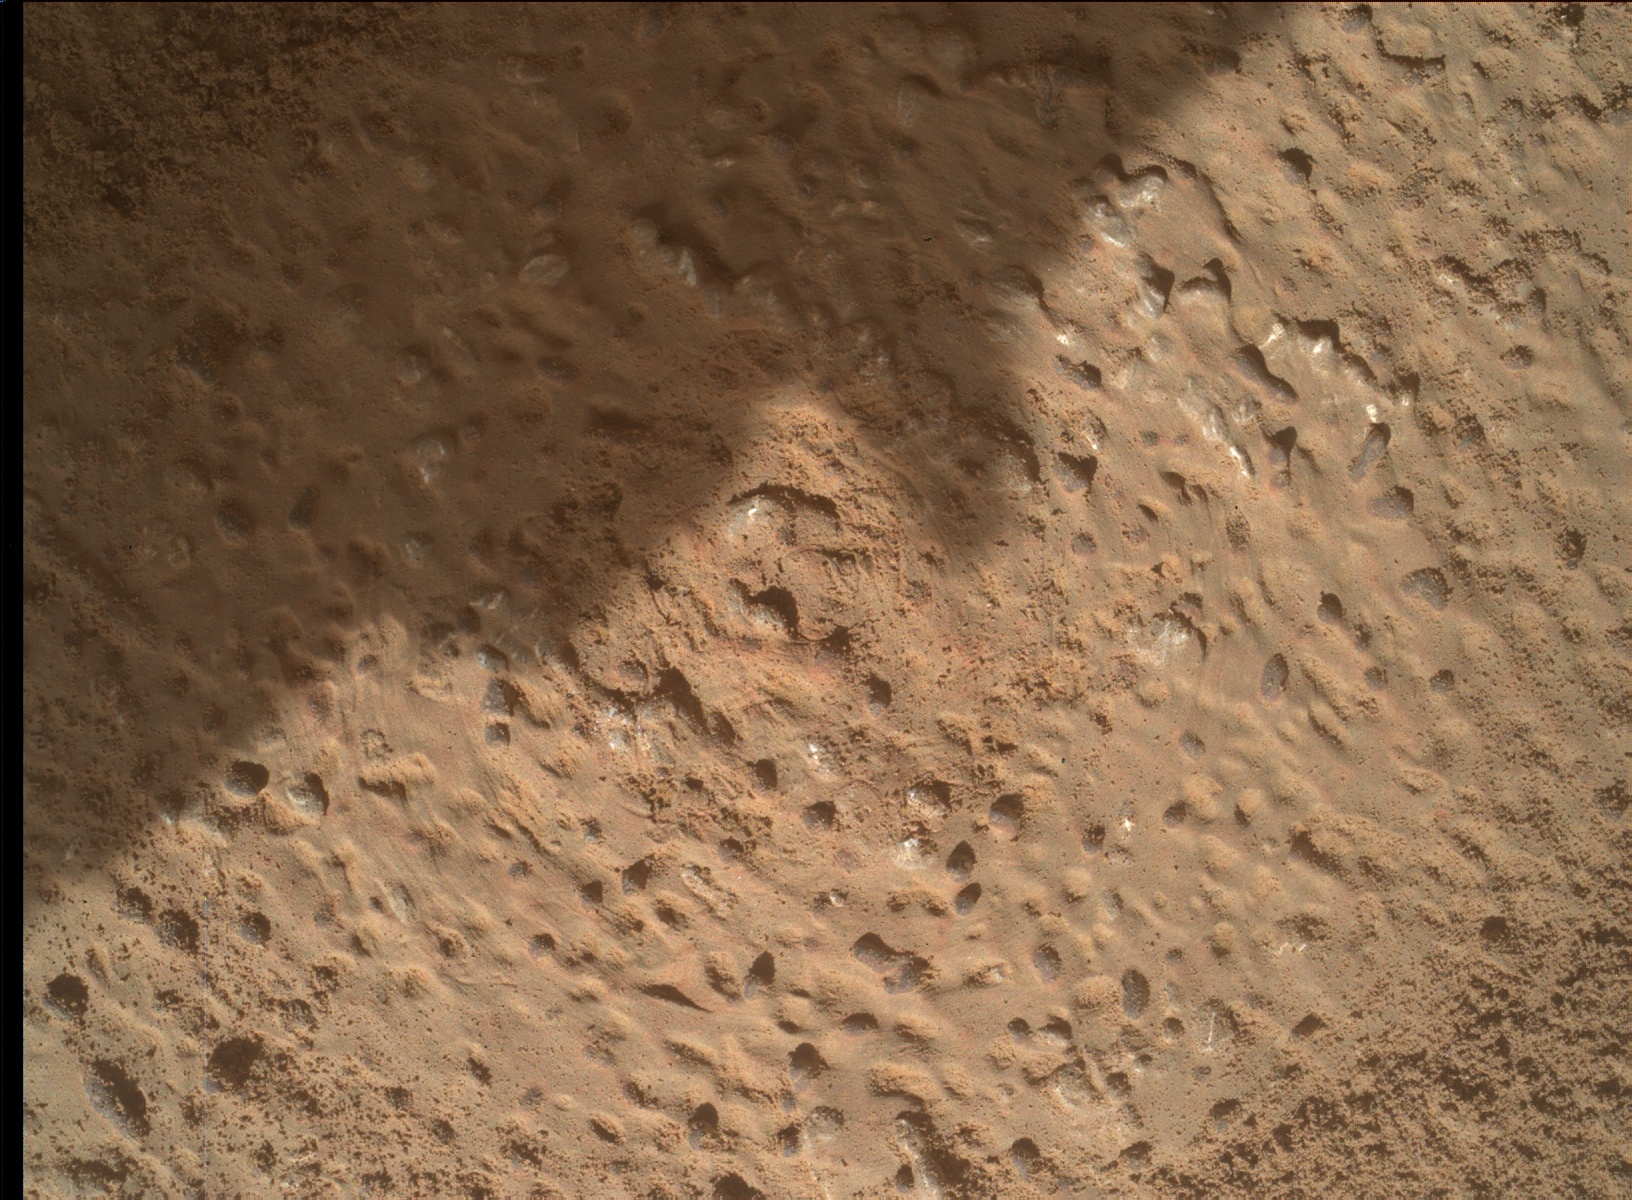 Nasa's Mars rover Curiosity acquired this image using its Mars Hand Lens Imager (MAHLI) on Sol 3224